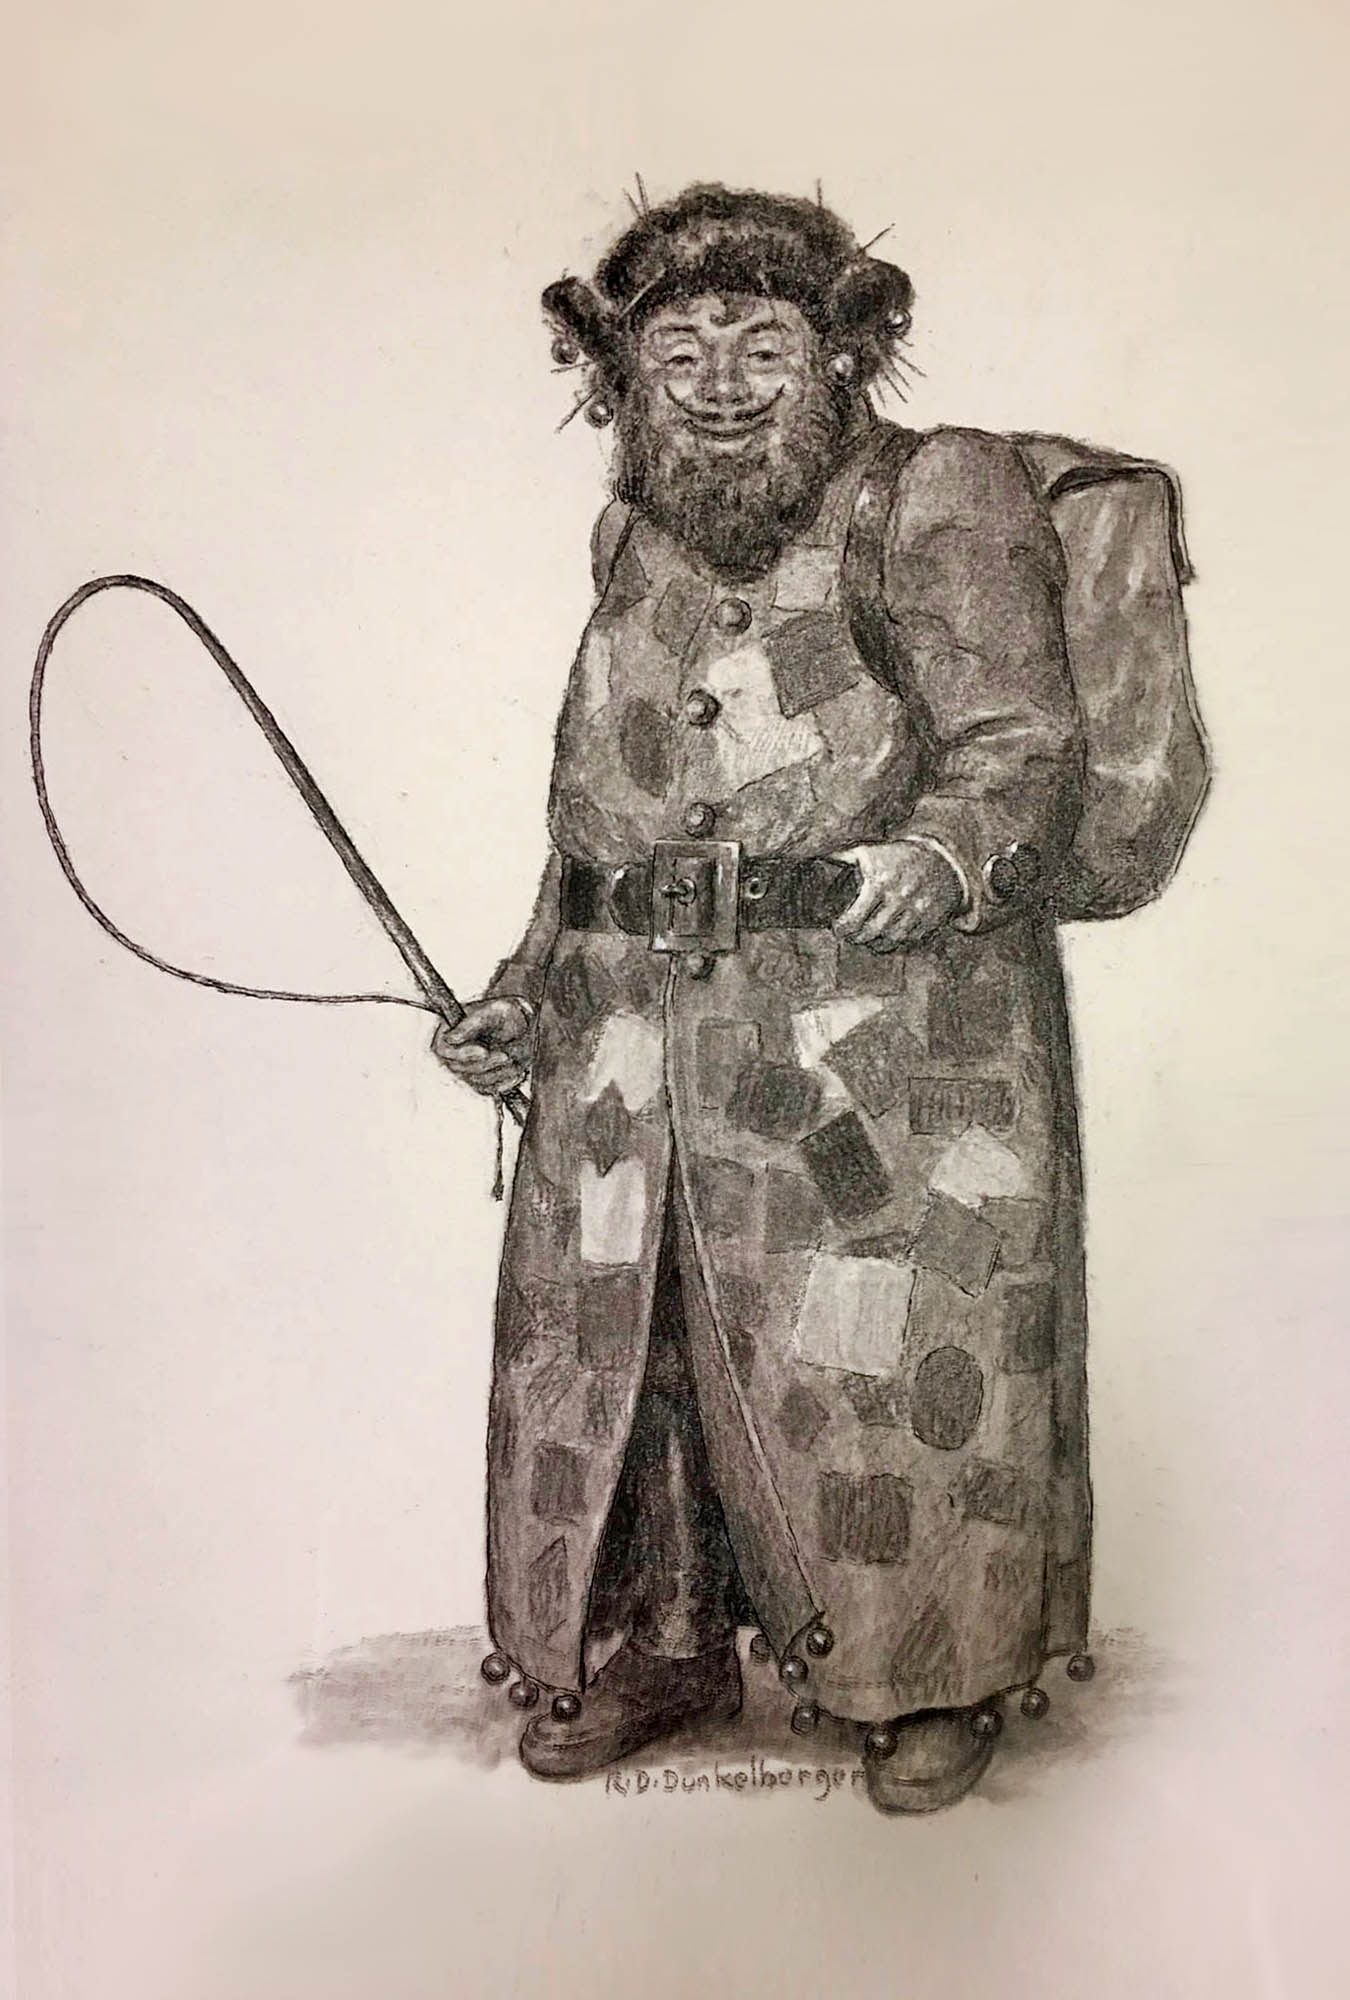 Belsnickel drawing